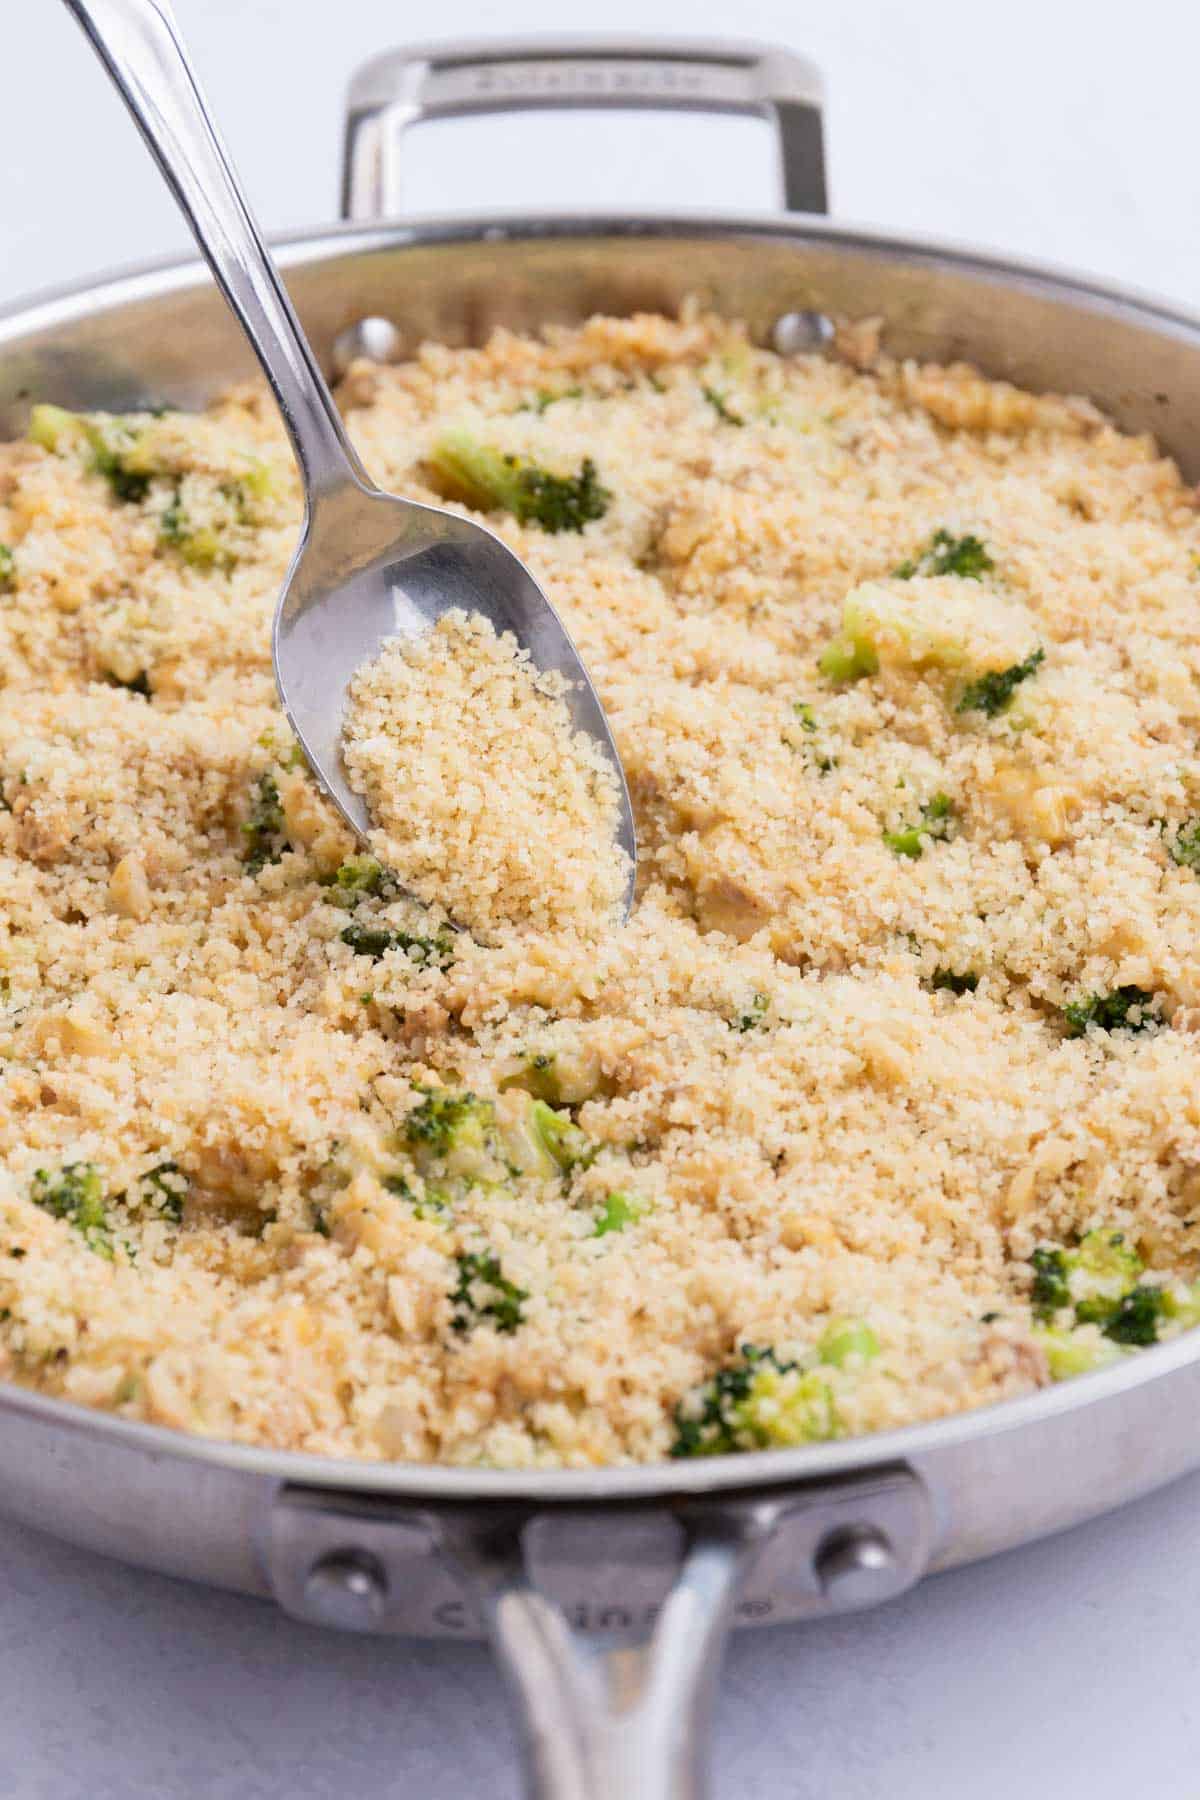 The Parmesan-bread crumb topping is spread over the cheesy mixture.